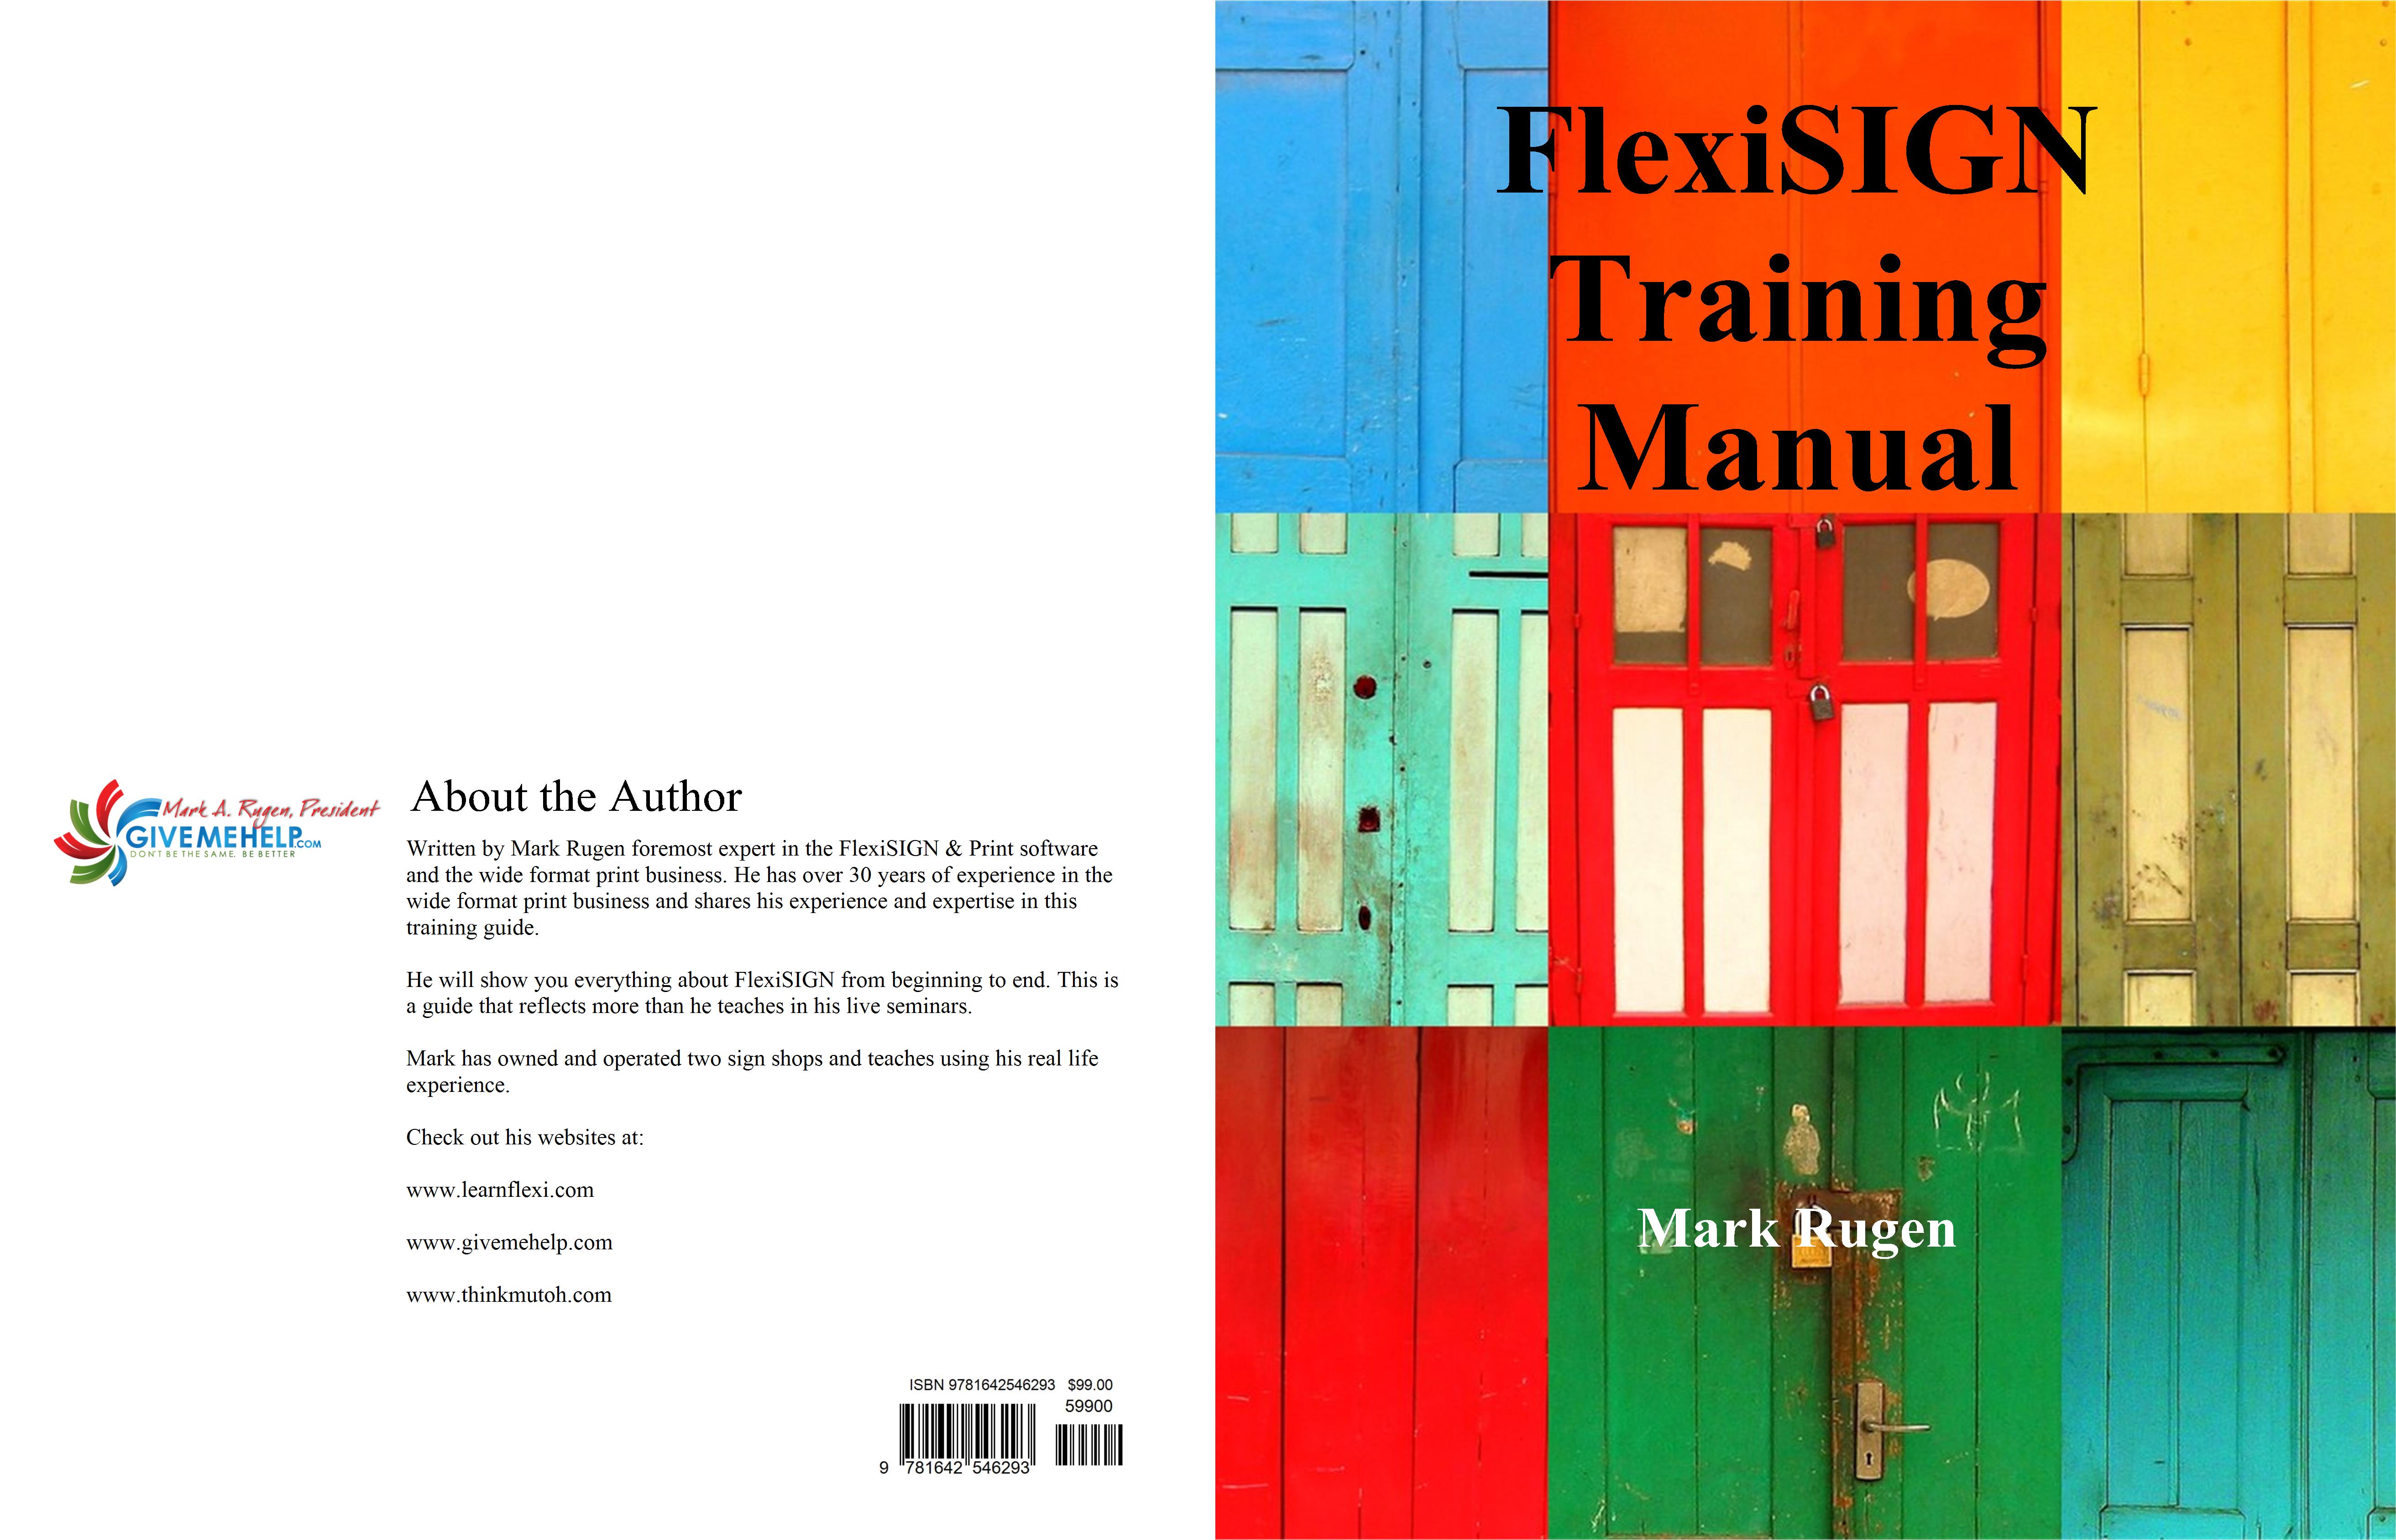 FlexiSIGN Training Manual cover image